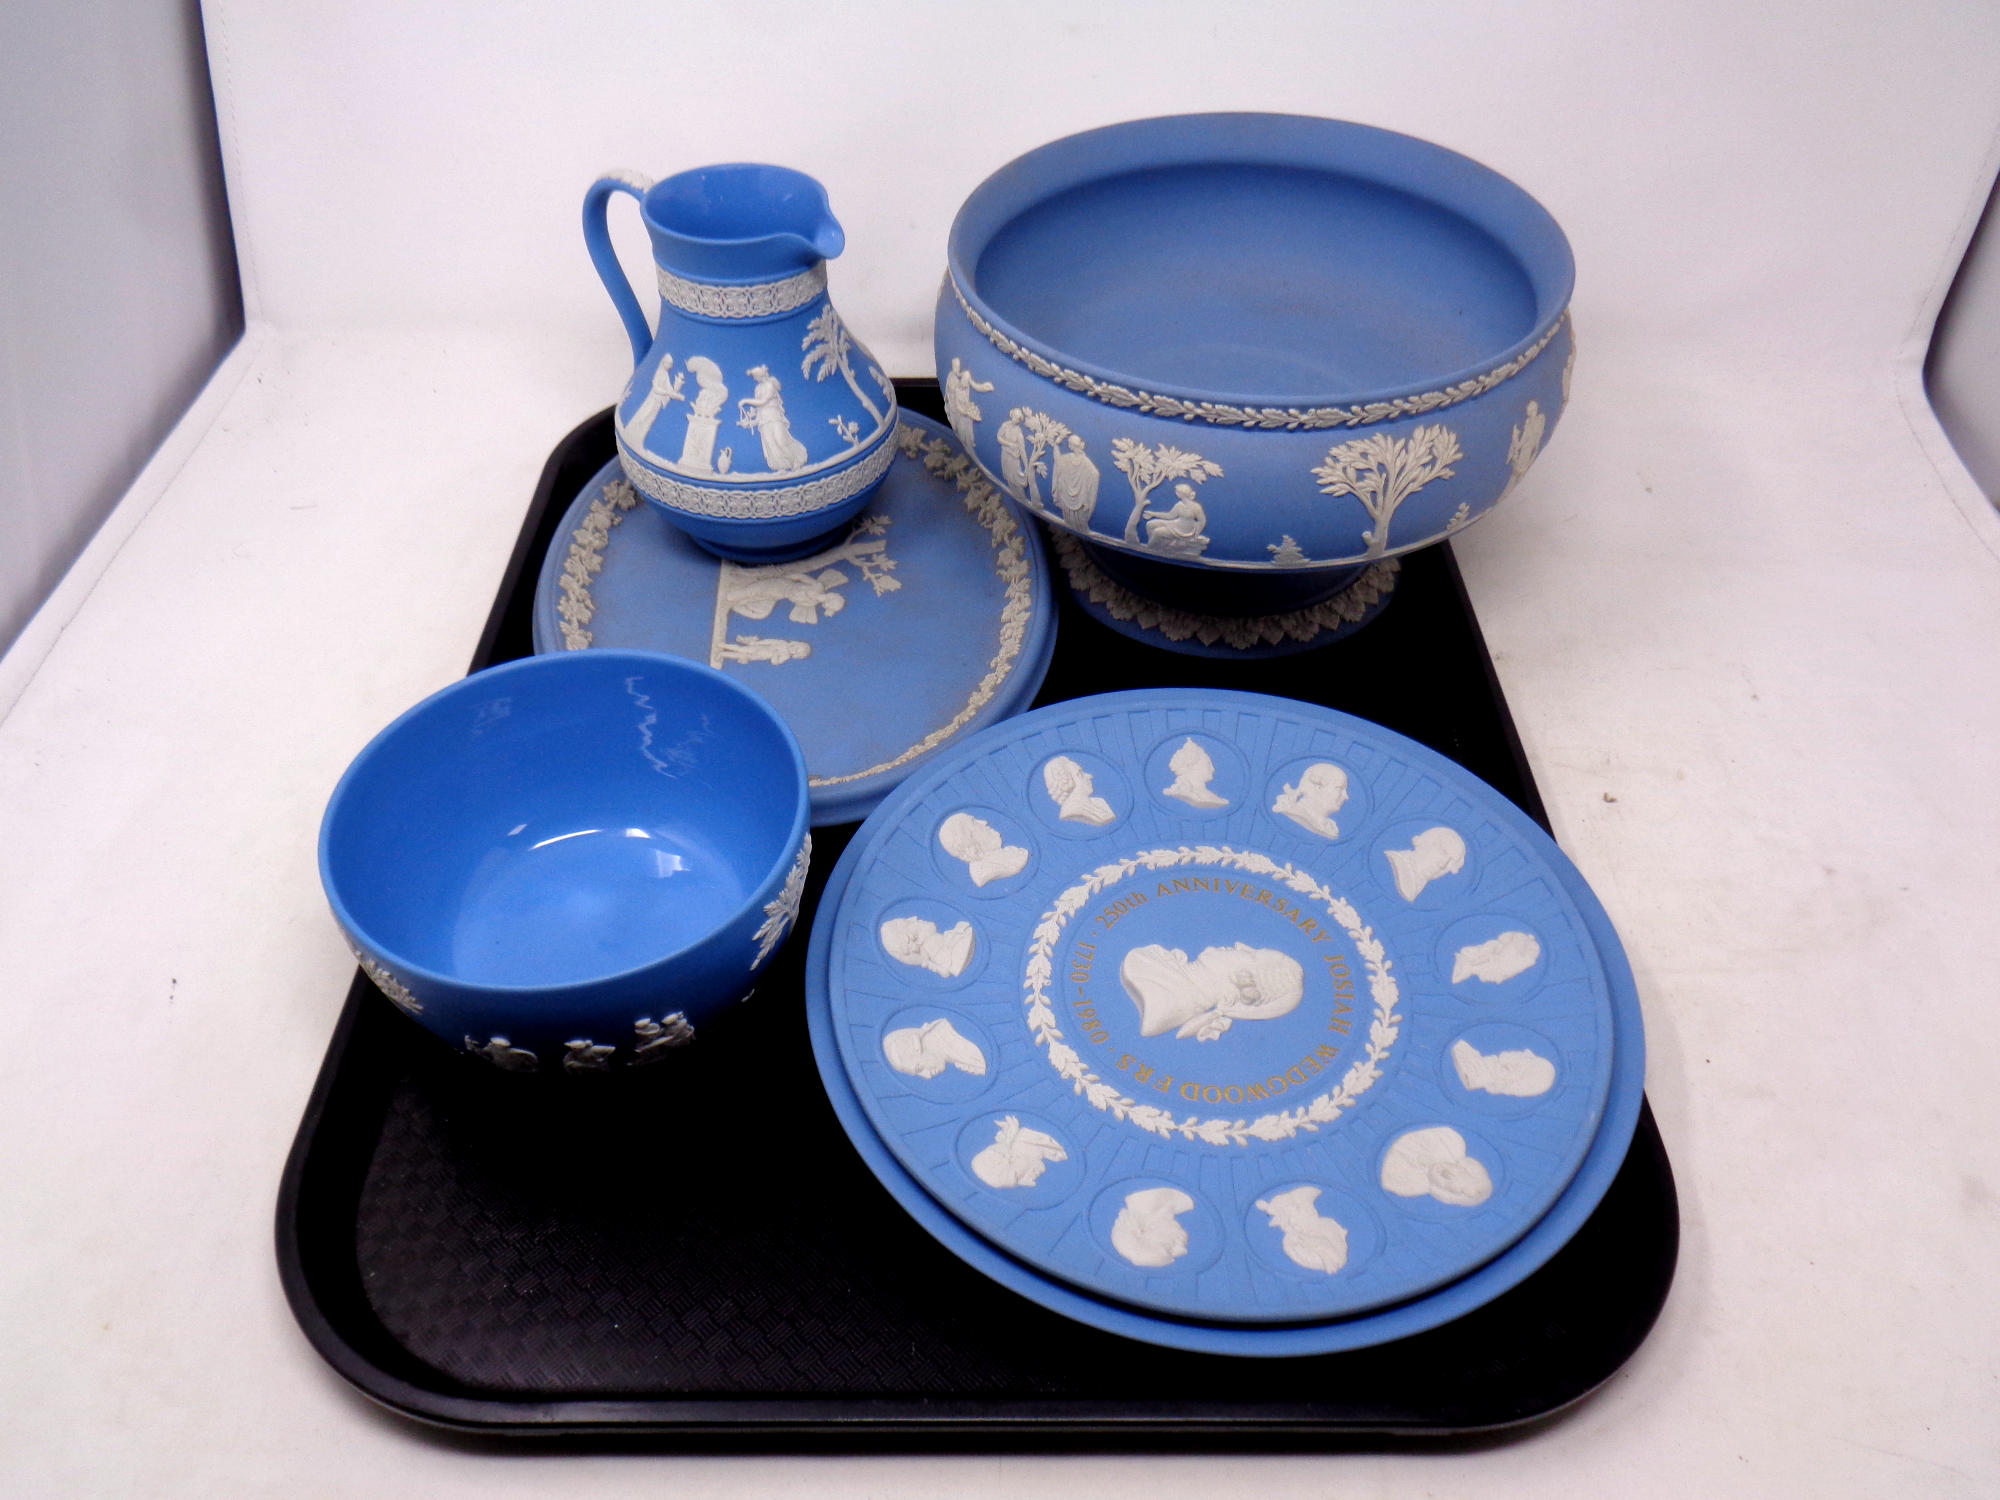 A tray containing six pieces of Wedgwood Jasperware to include anniversary plates, bowl,